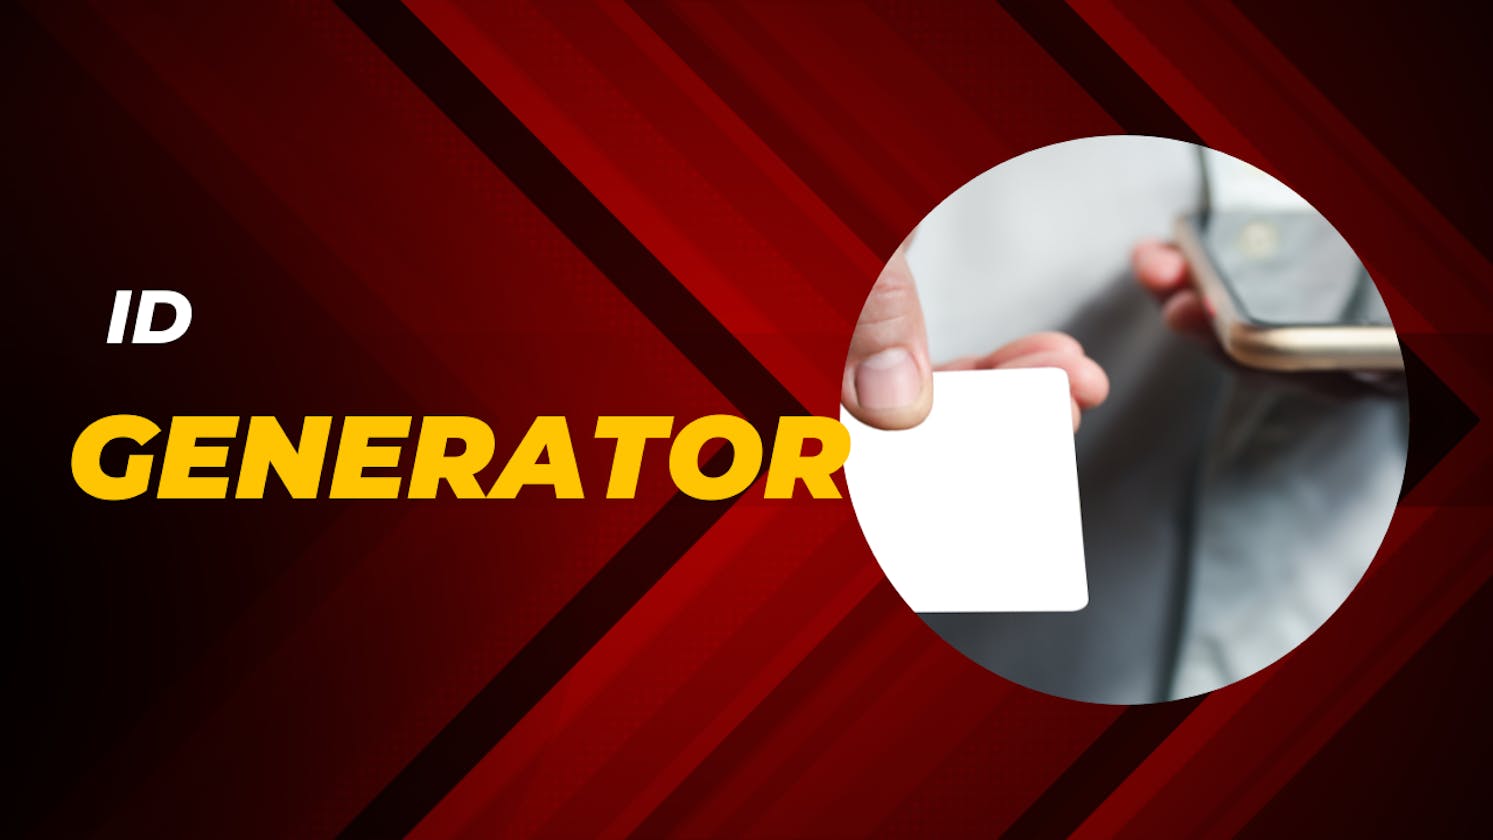 generate id with a generator function